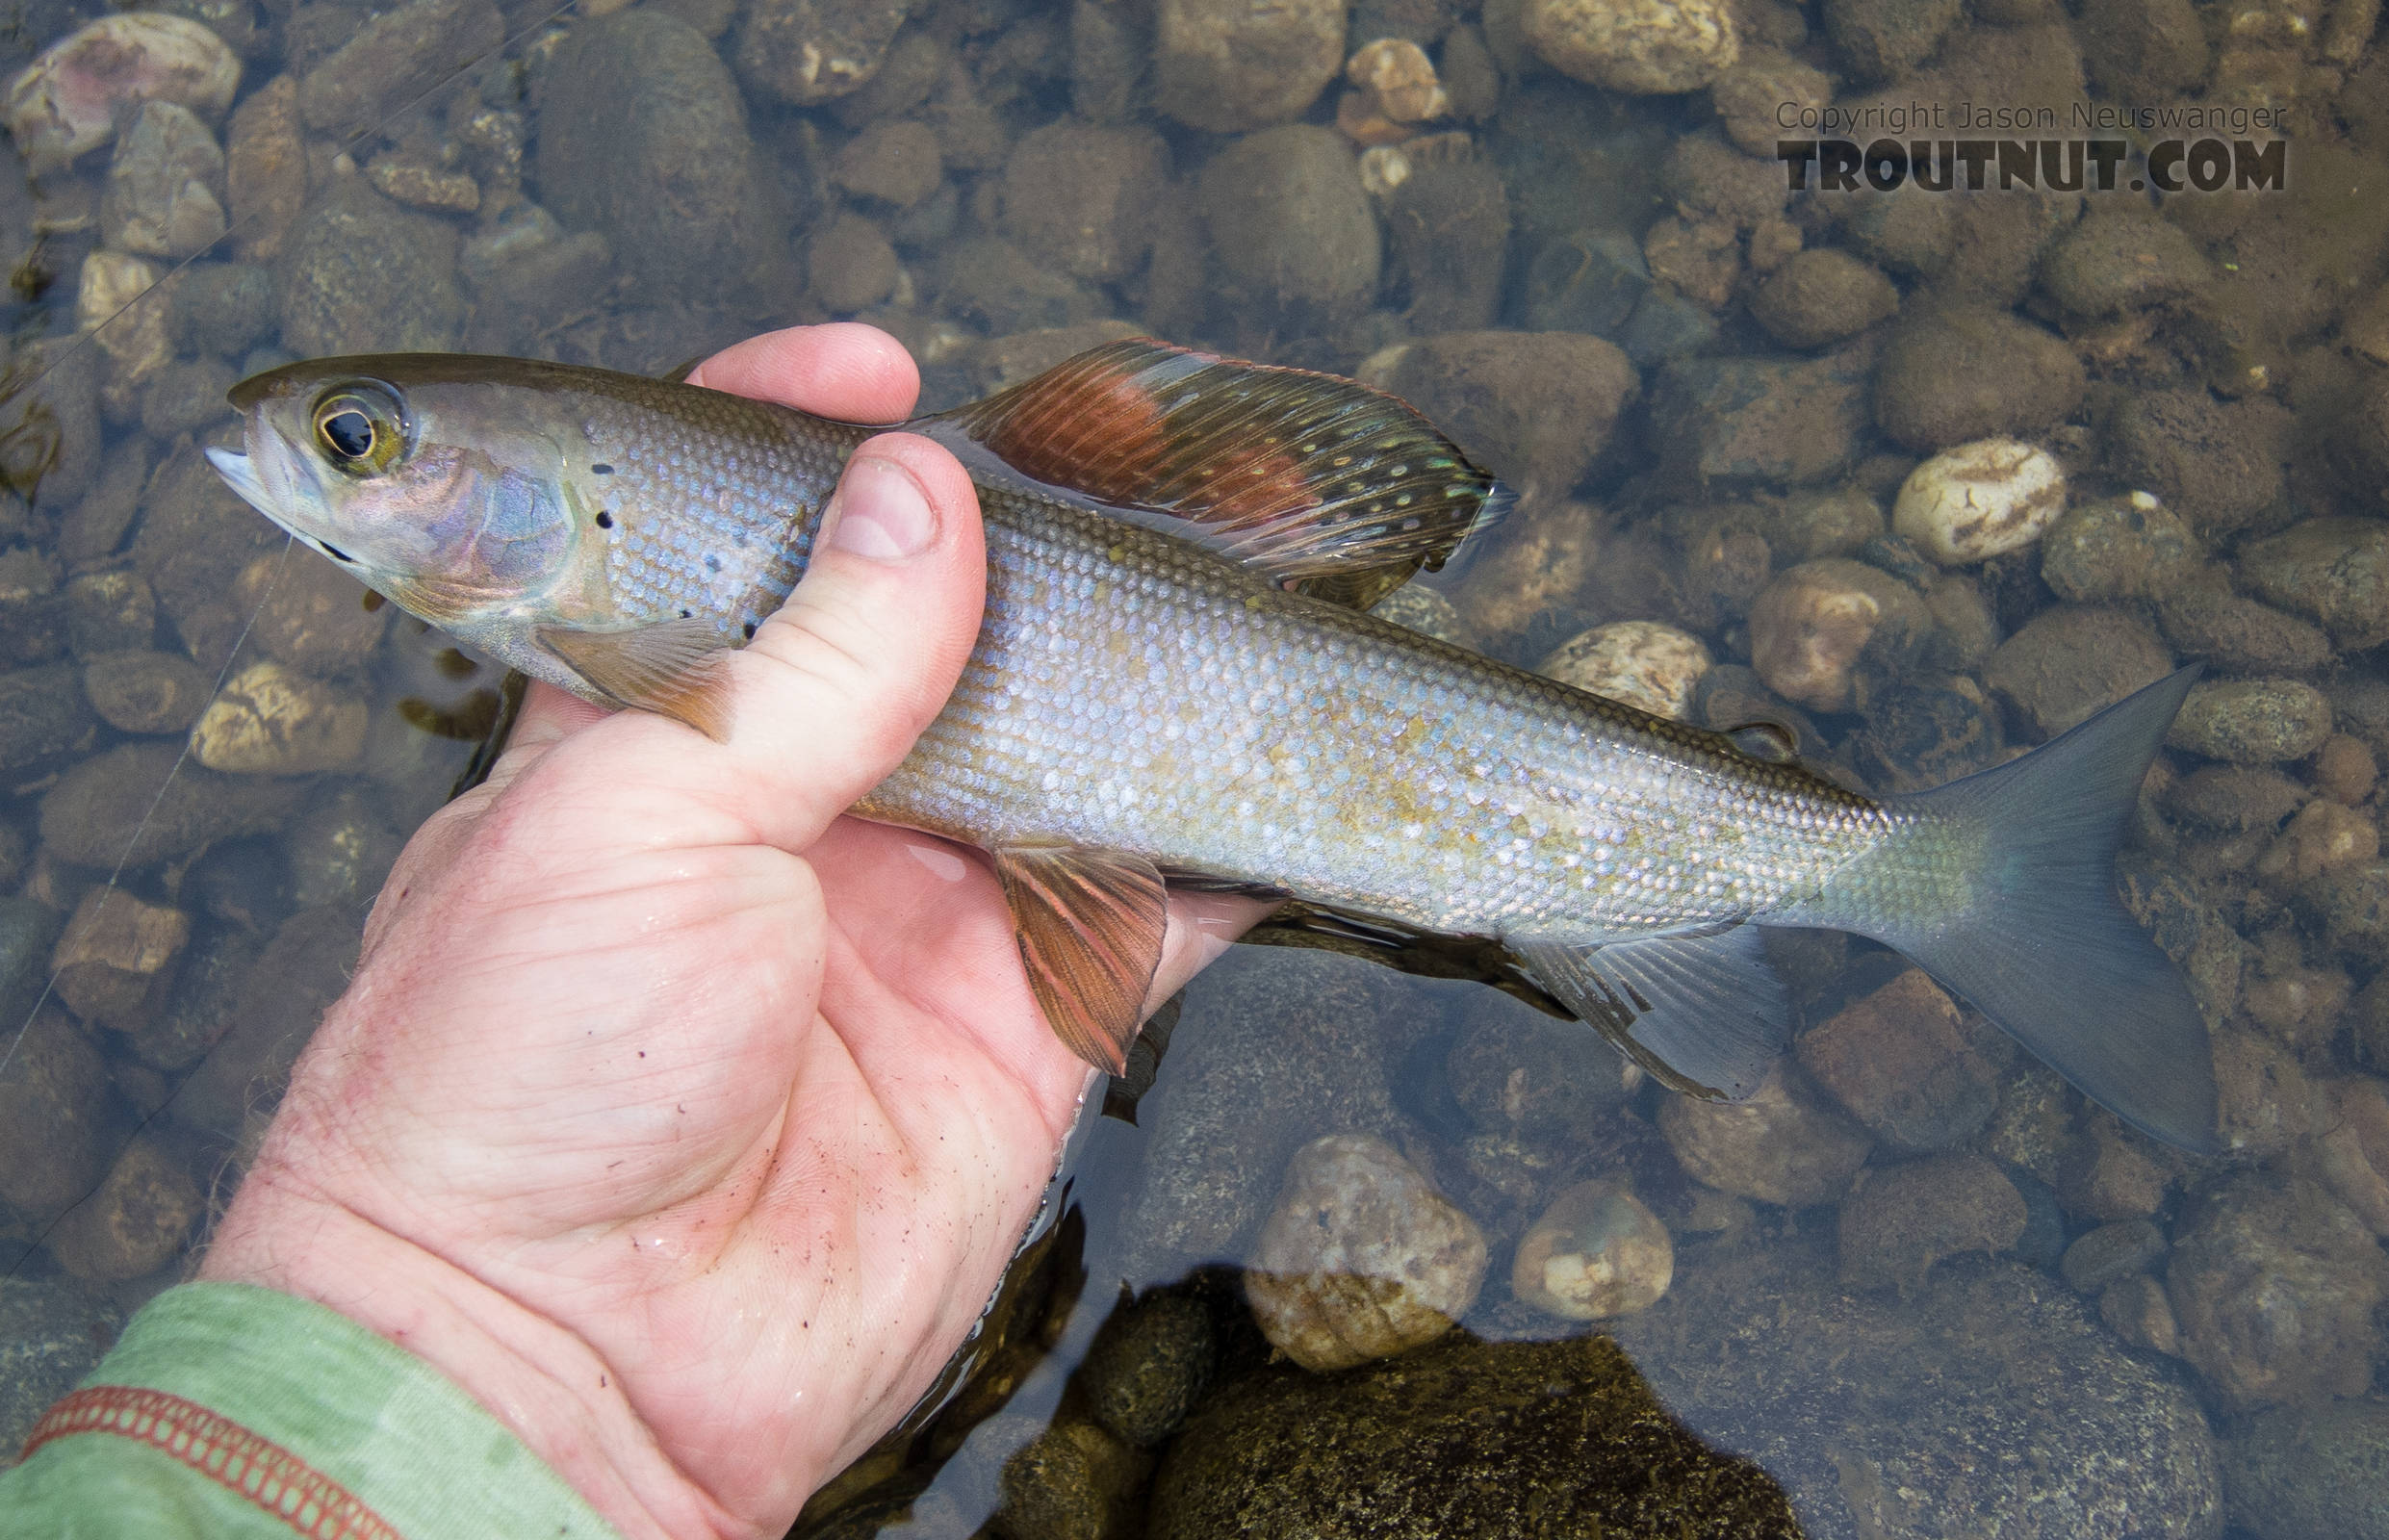 A dinky grayling in most places, this one was a lunker for this stream. From Mystery Creek # 170 in Alaska.